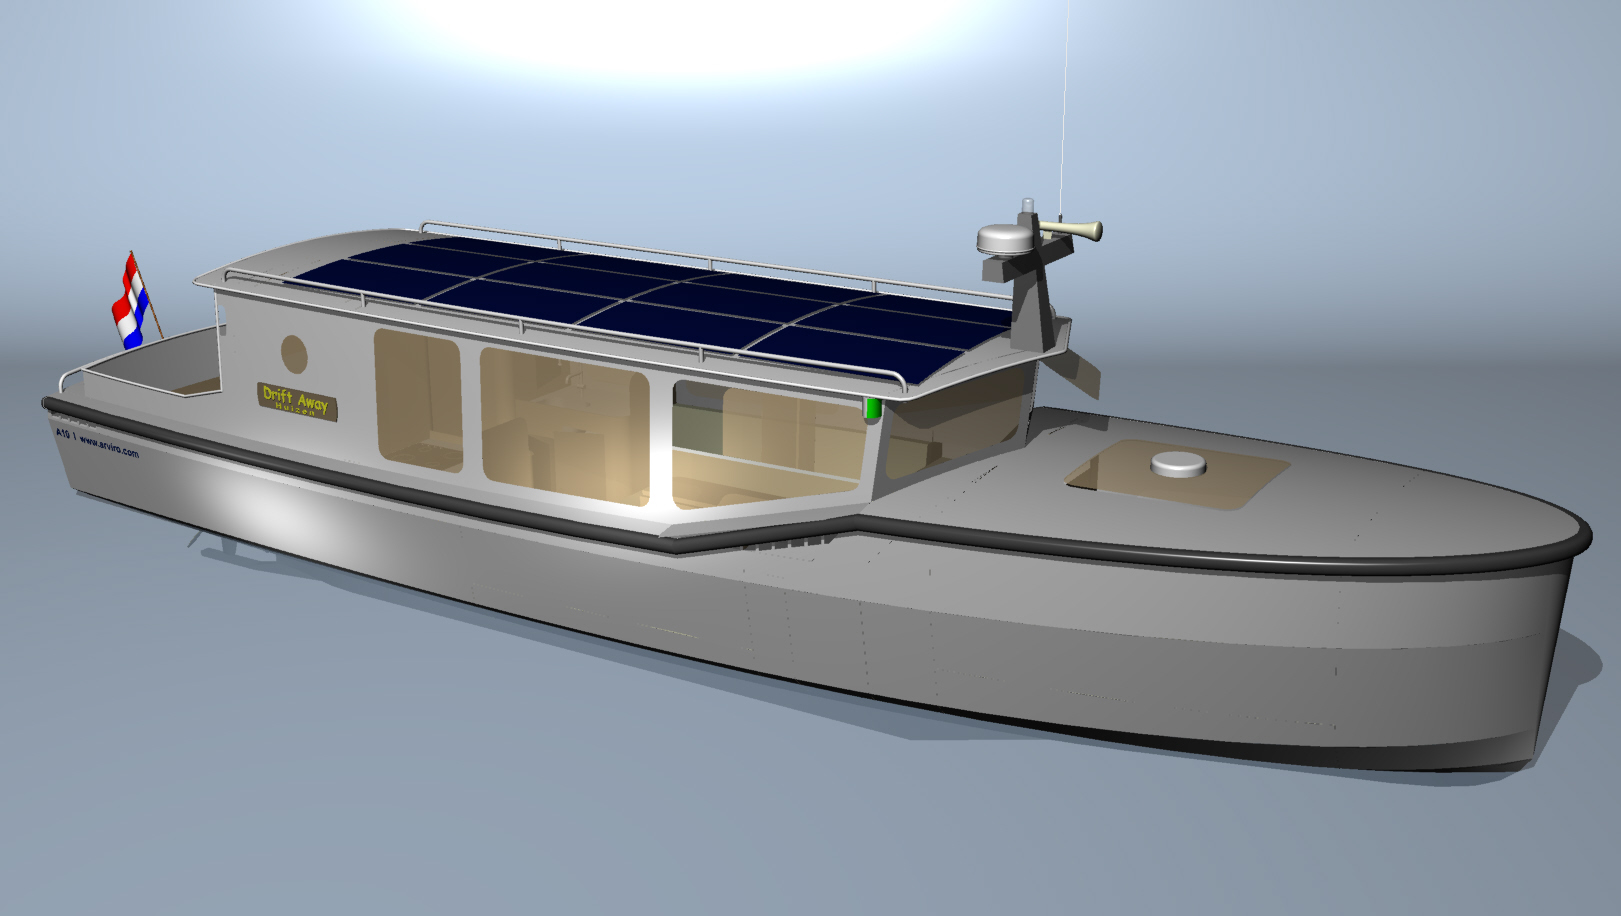 All electric &amp; solar powered motorboat | Boat Design Net